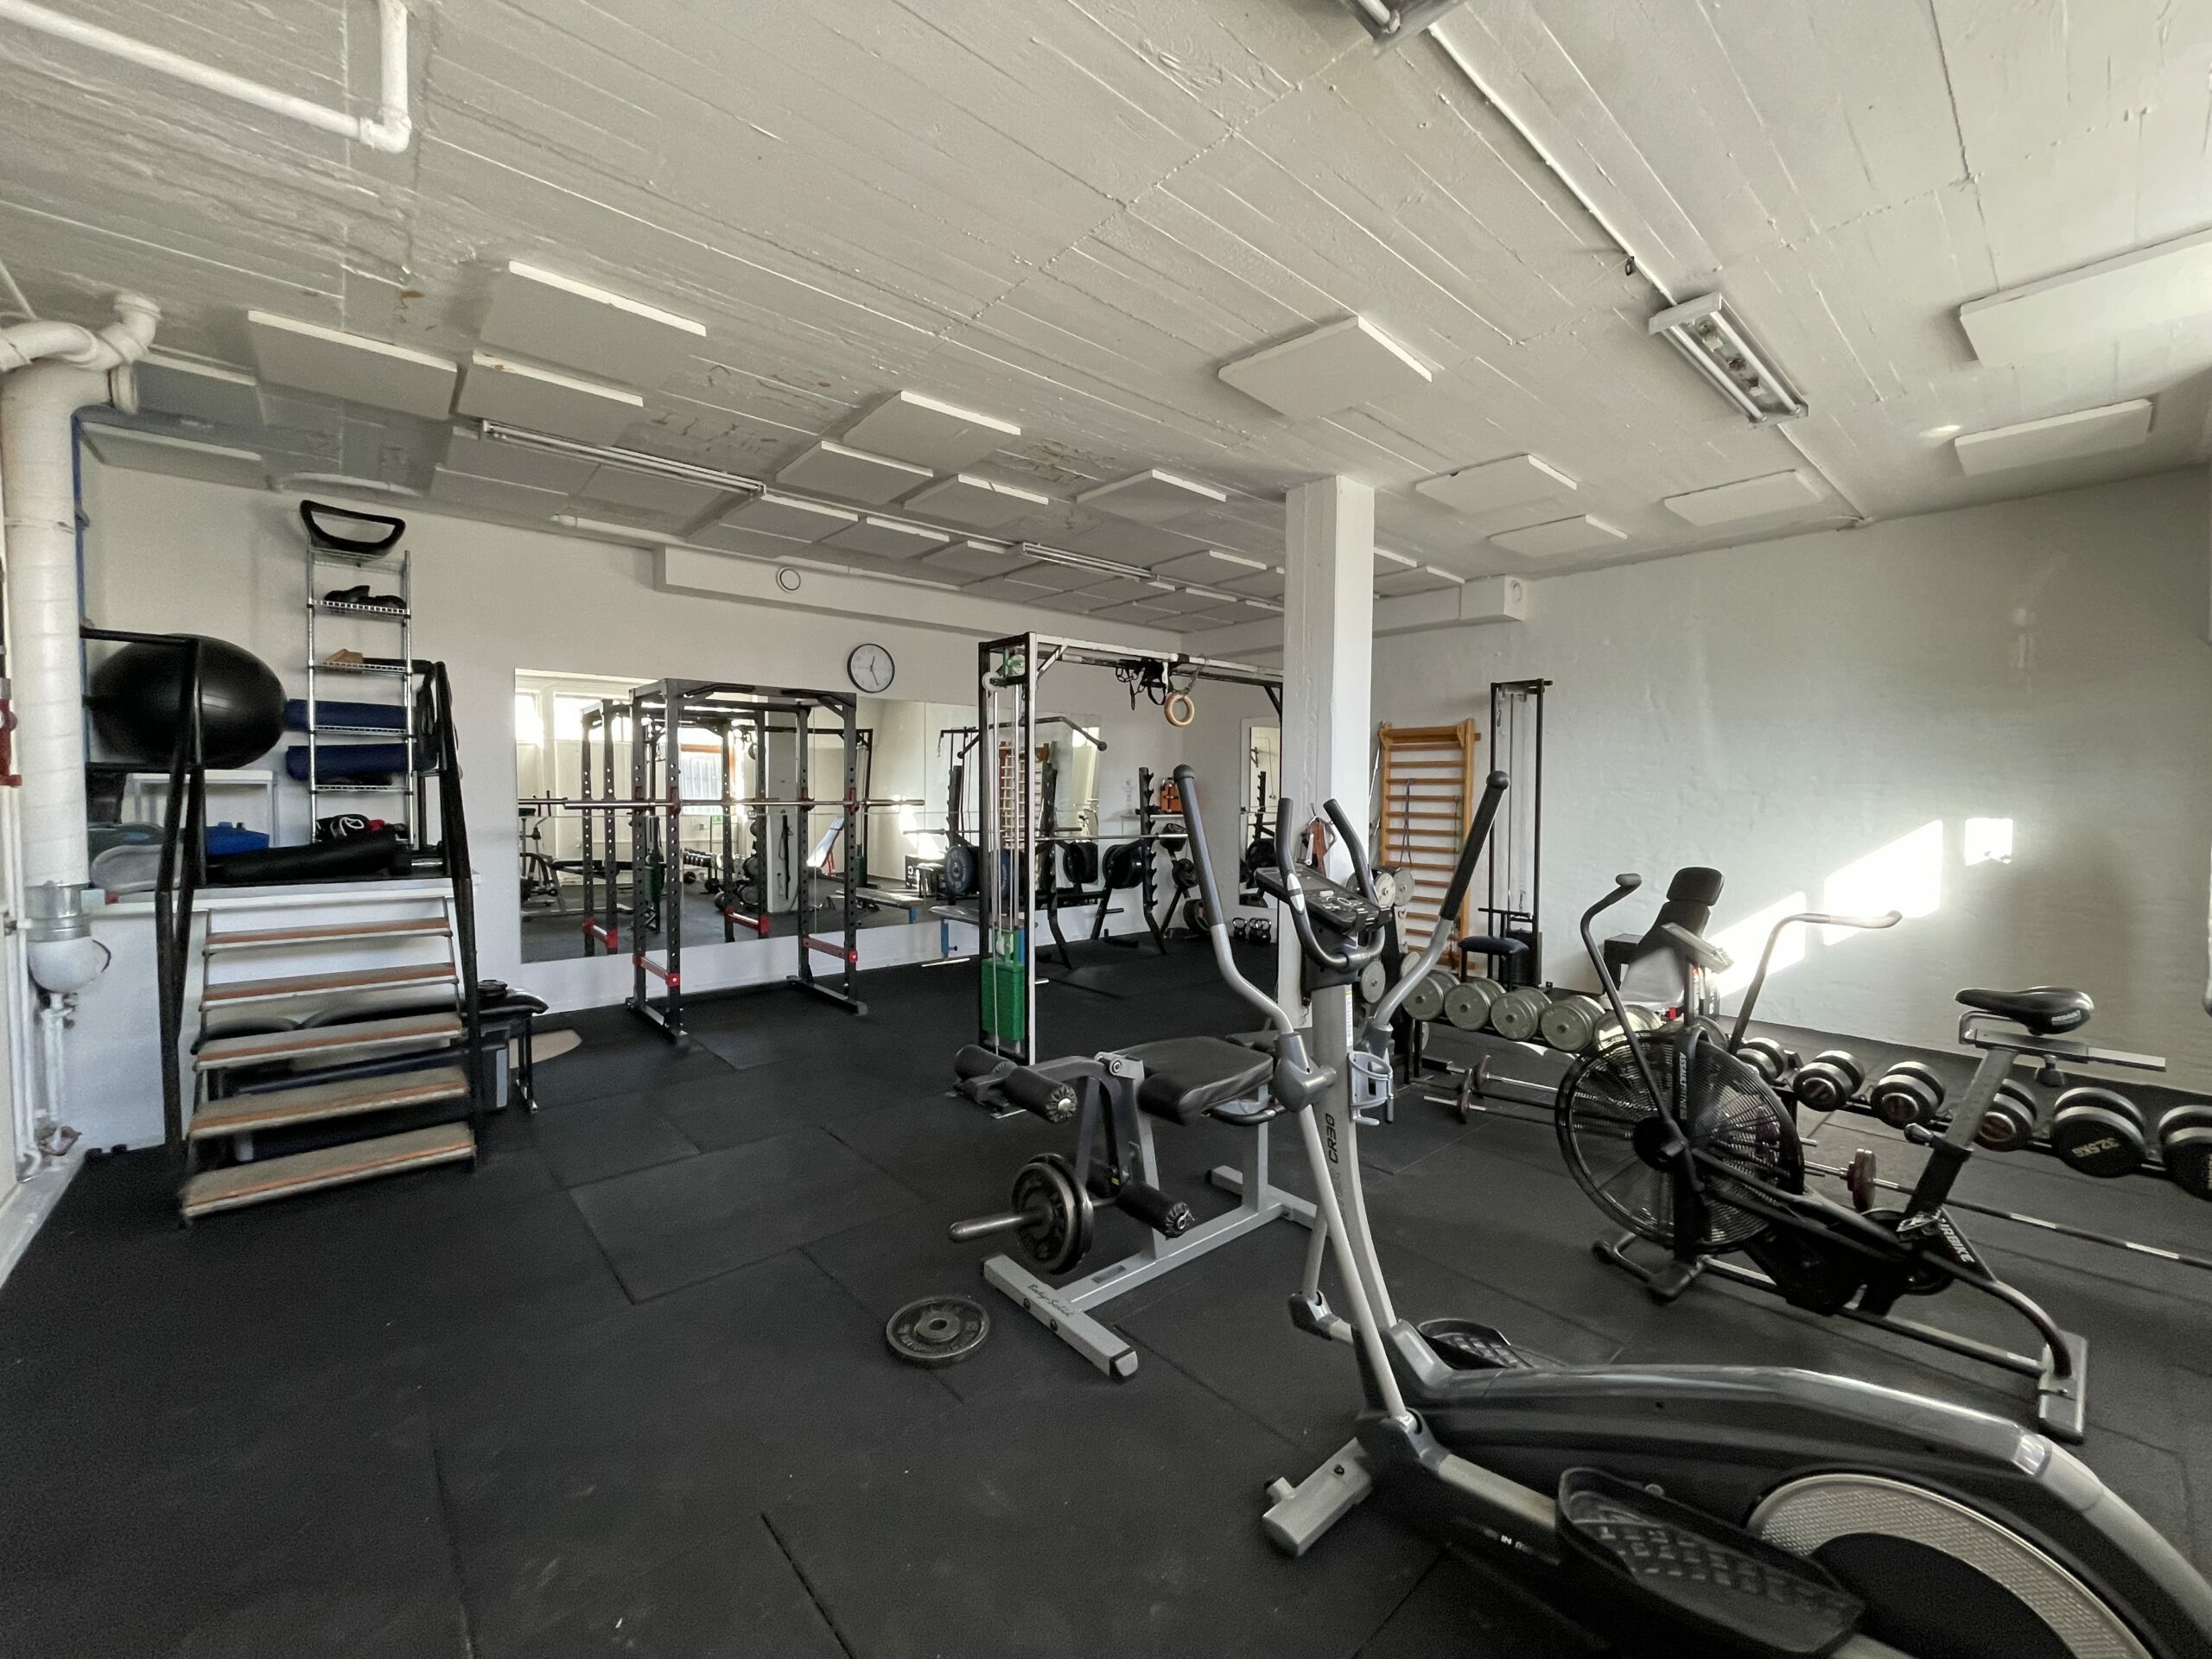 SDN Gym from entrance